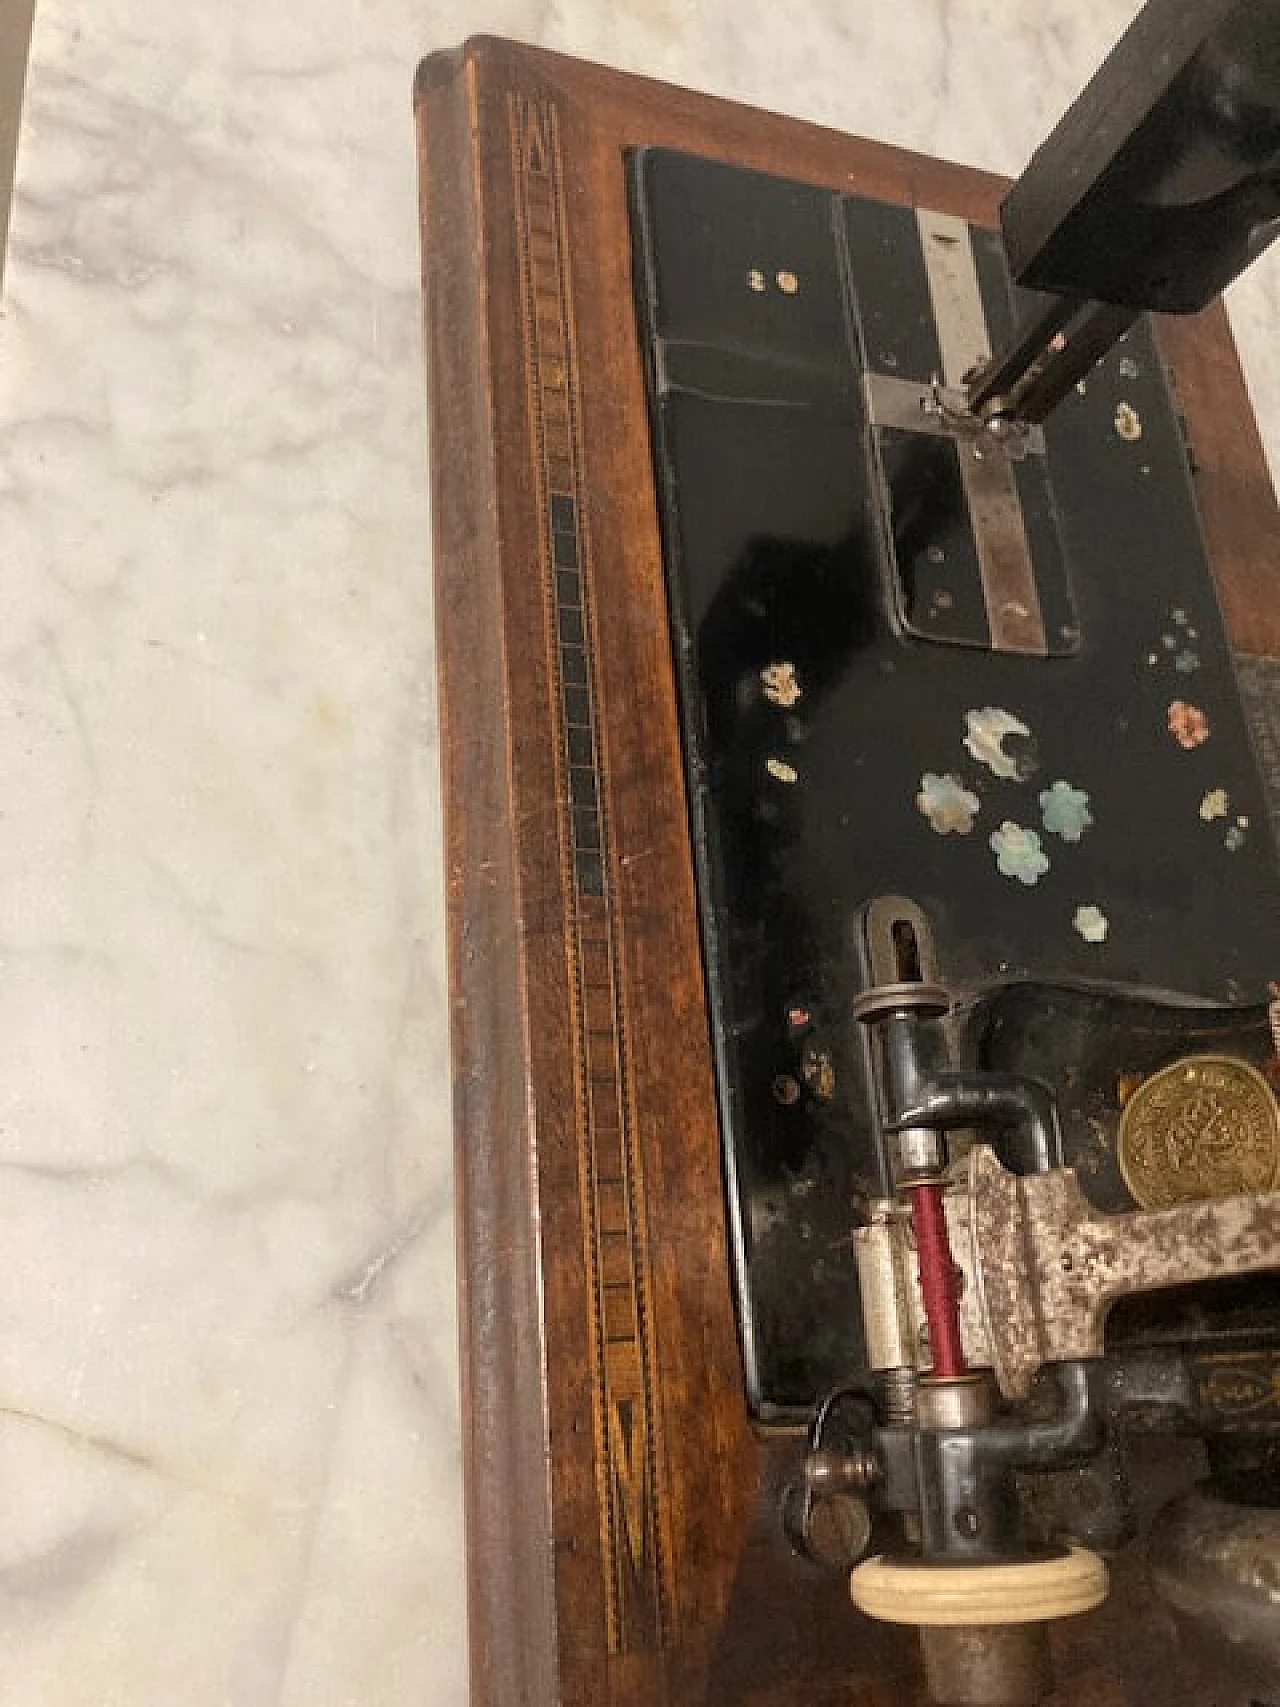 Tabletop sewing machine with mother-of-pearl inlays, late 19th century 3